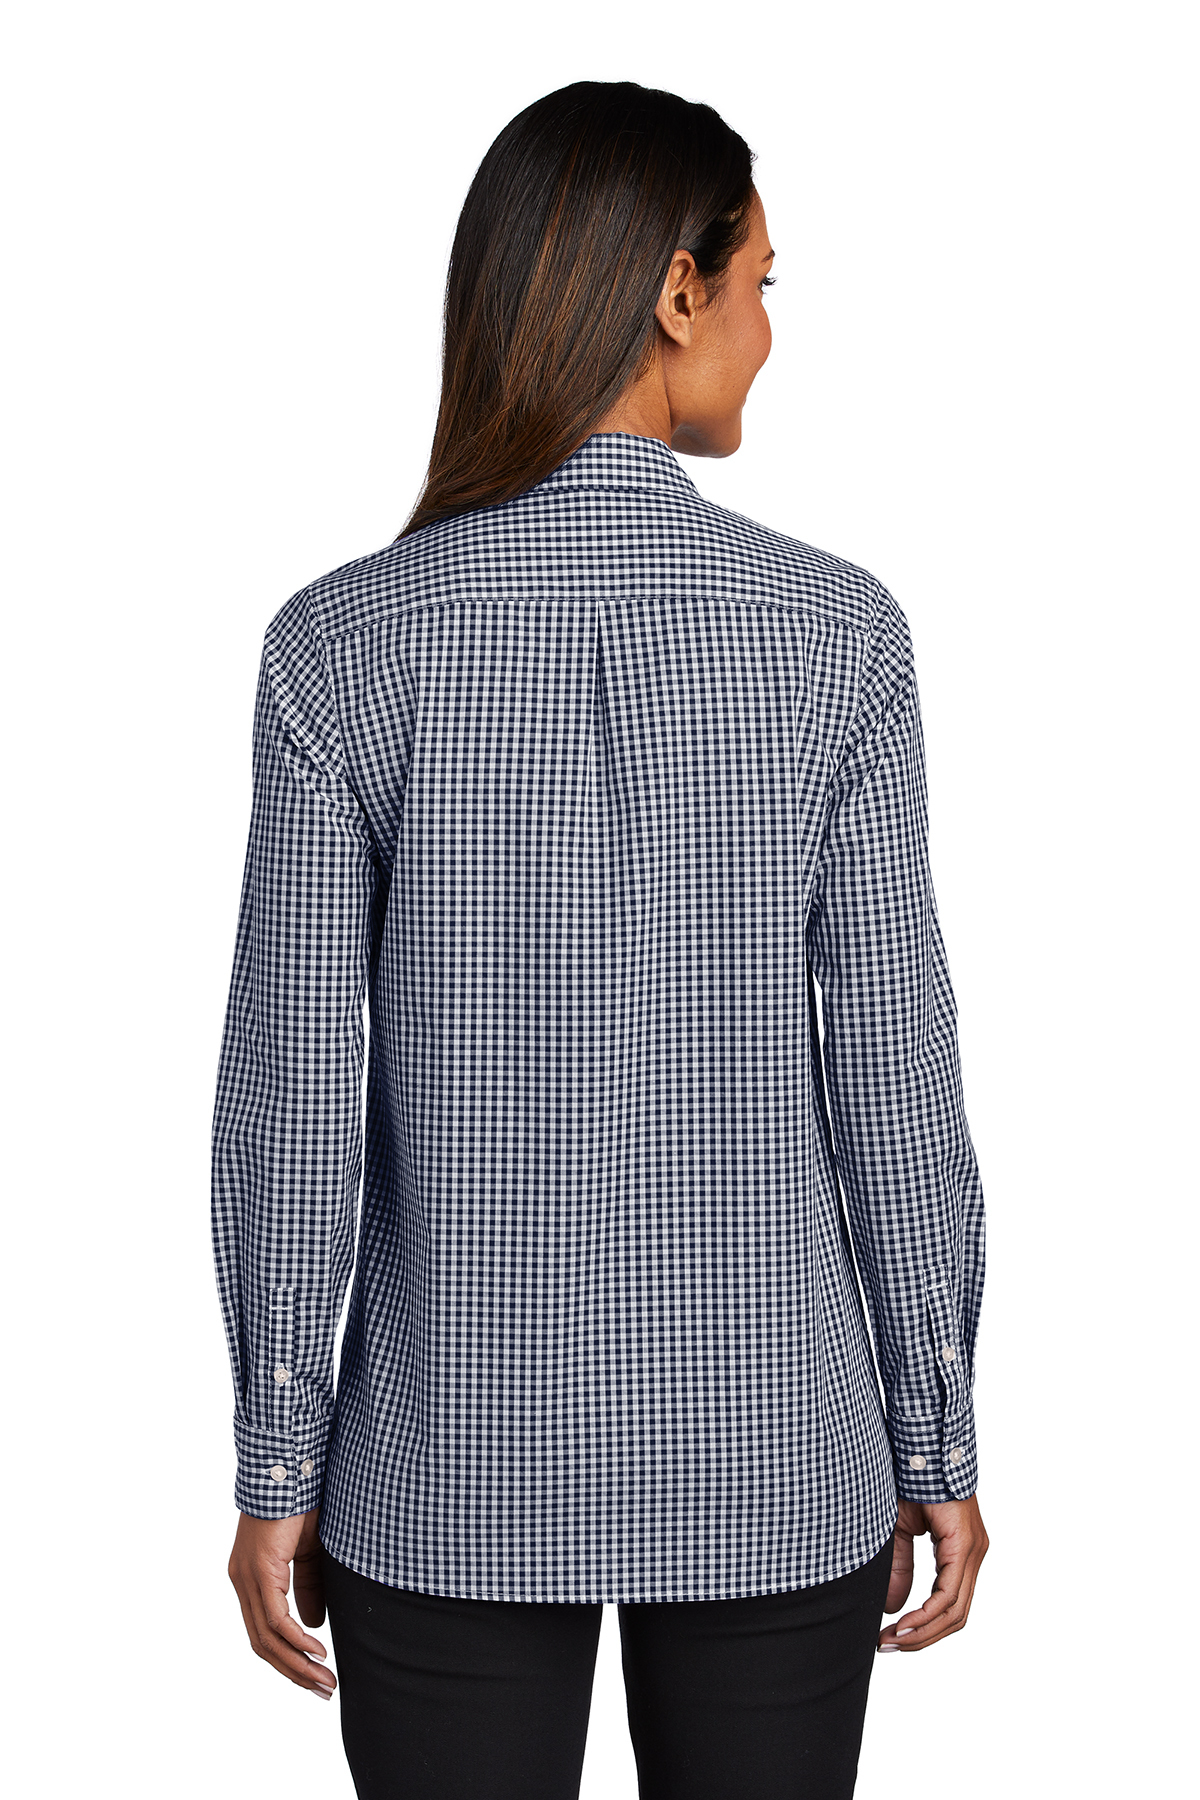 Port Authority Ladies Broadcloth Gingham Easy Care Shirt | Product | SanMar